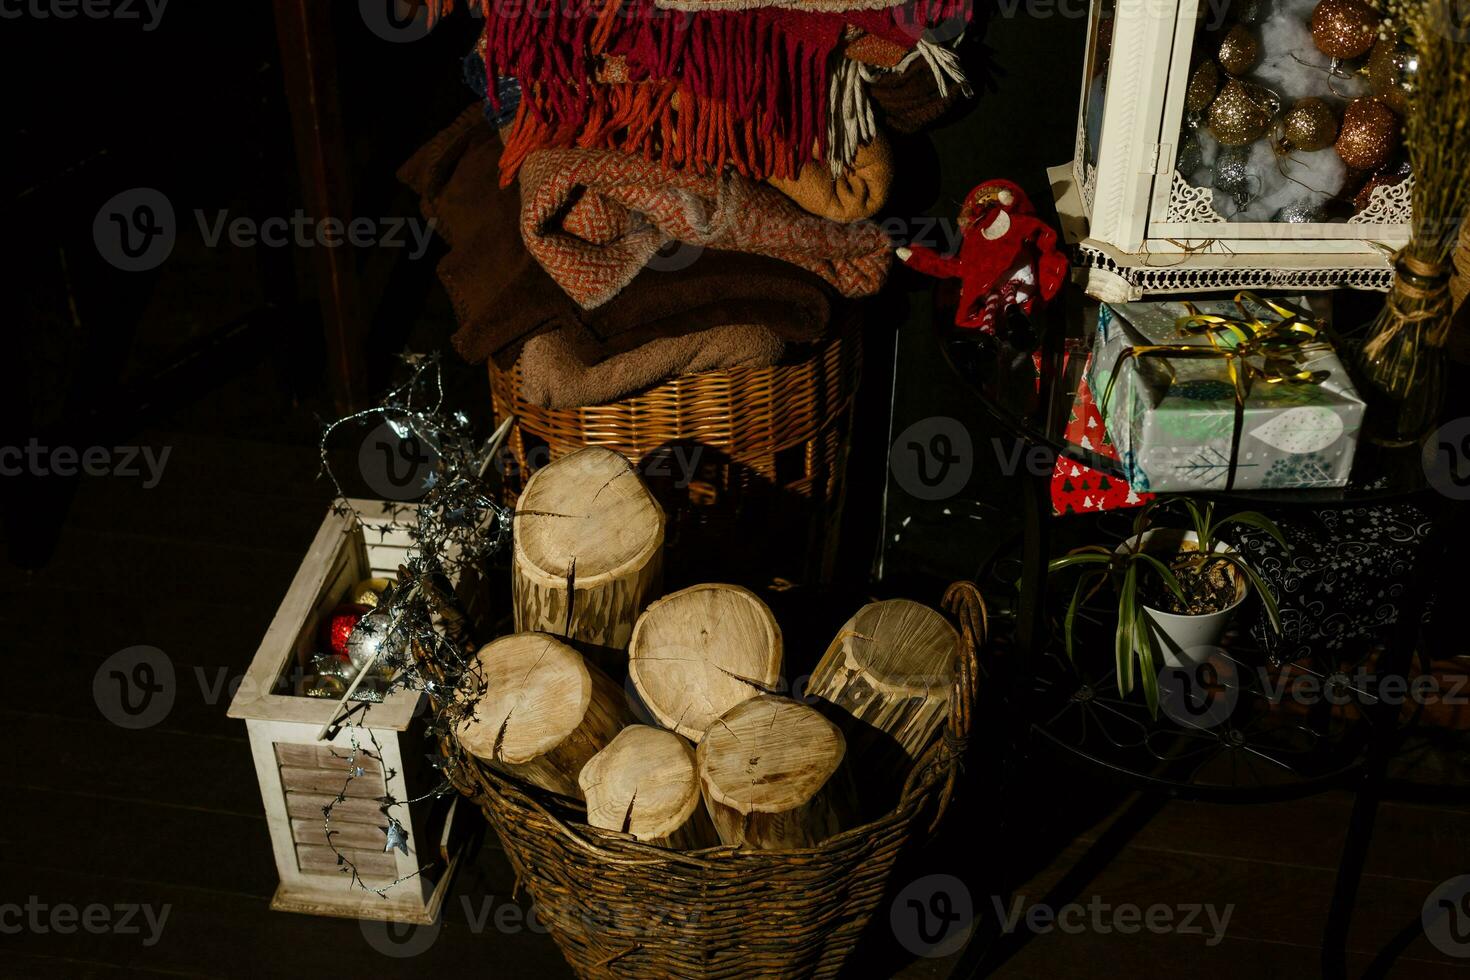 Wintertime in rustic interior. Logs for fireplace, set of cosy blankets, wooden box with Christmas baubles. Christmas garland and wrapped present. Cozy scene, dark background photo